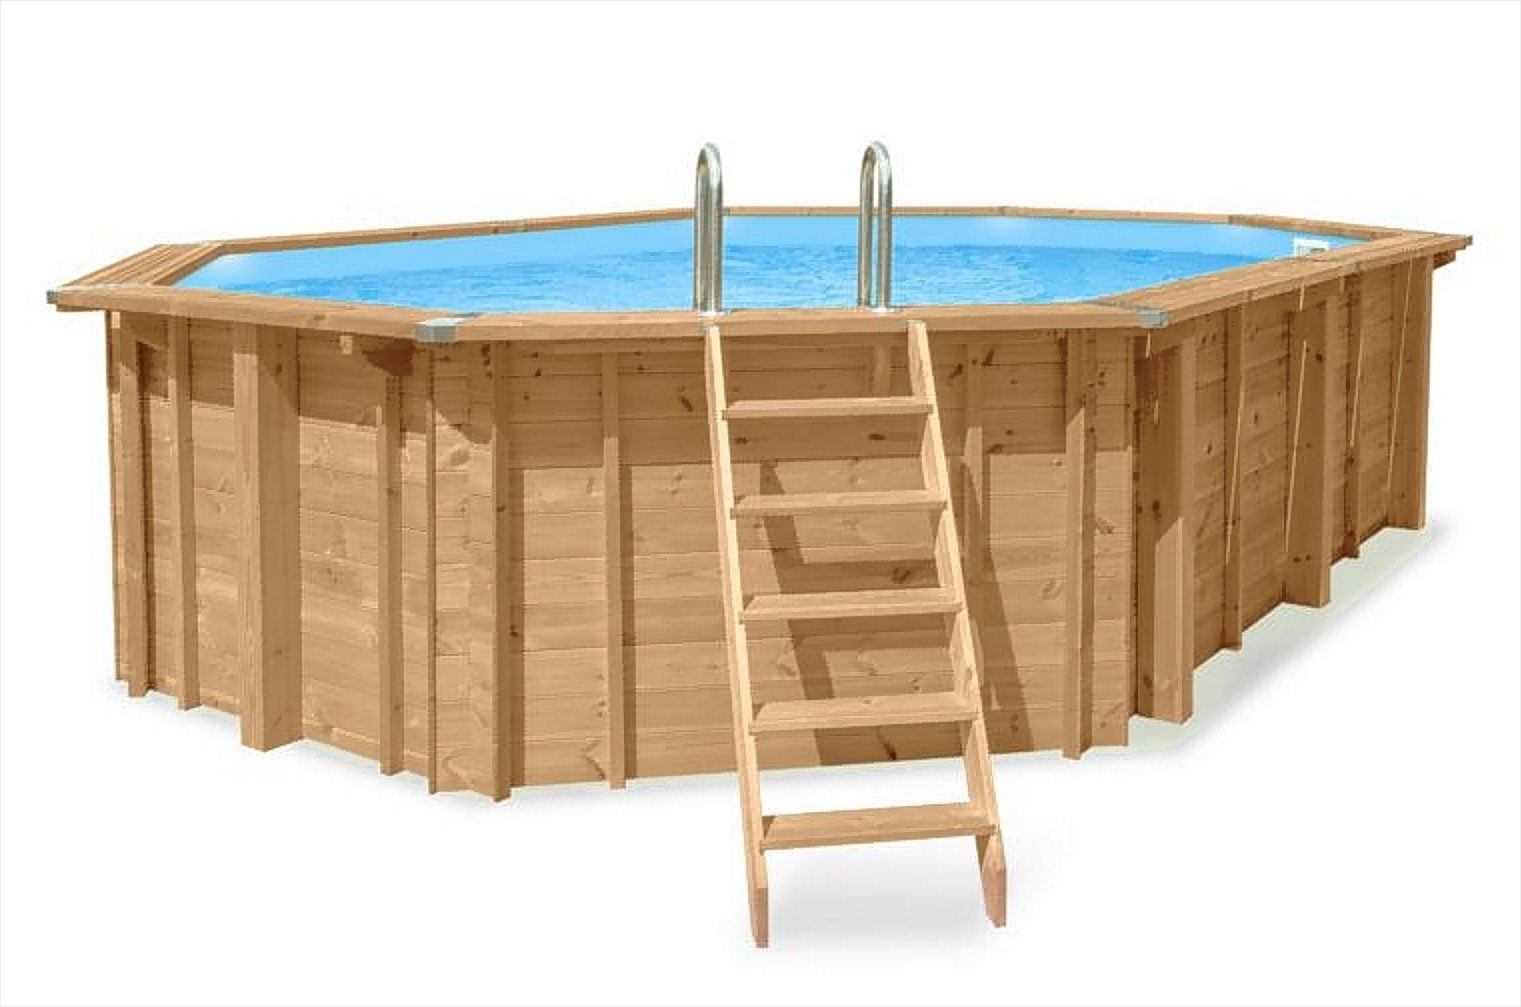 Sunnydream 07 wooden pool, oval, 8.40 x 4.90 meters, including premium filter system, filter medium, pool ladder, pool liner, floor and wall fleece, stainless steel corner joints